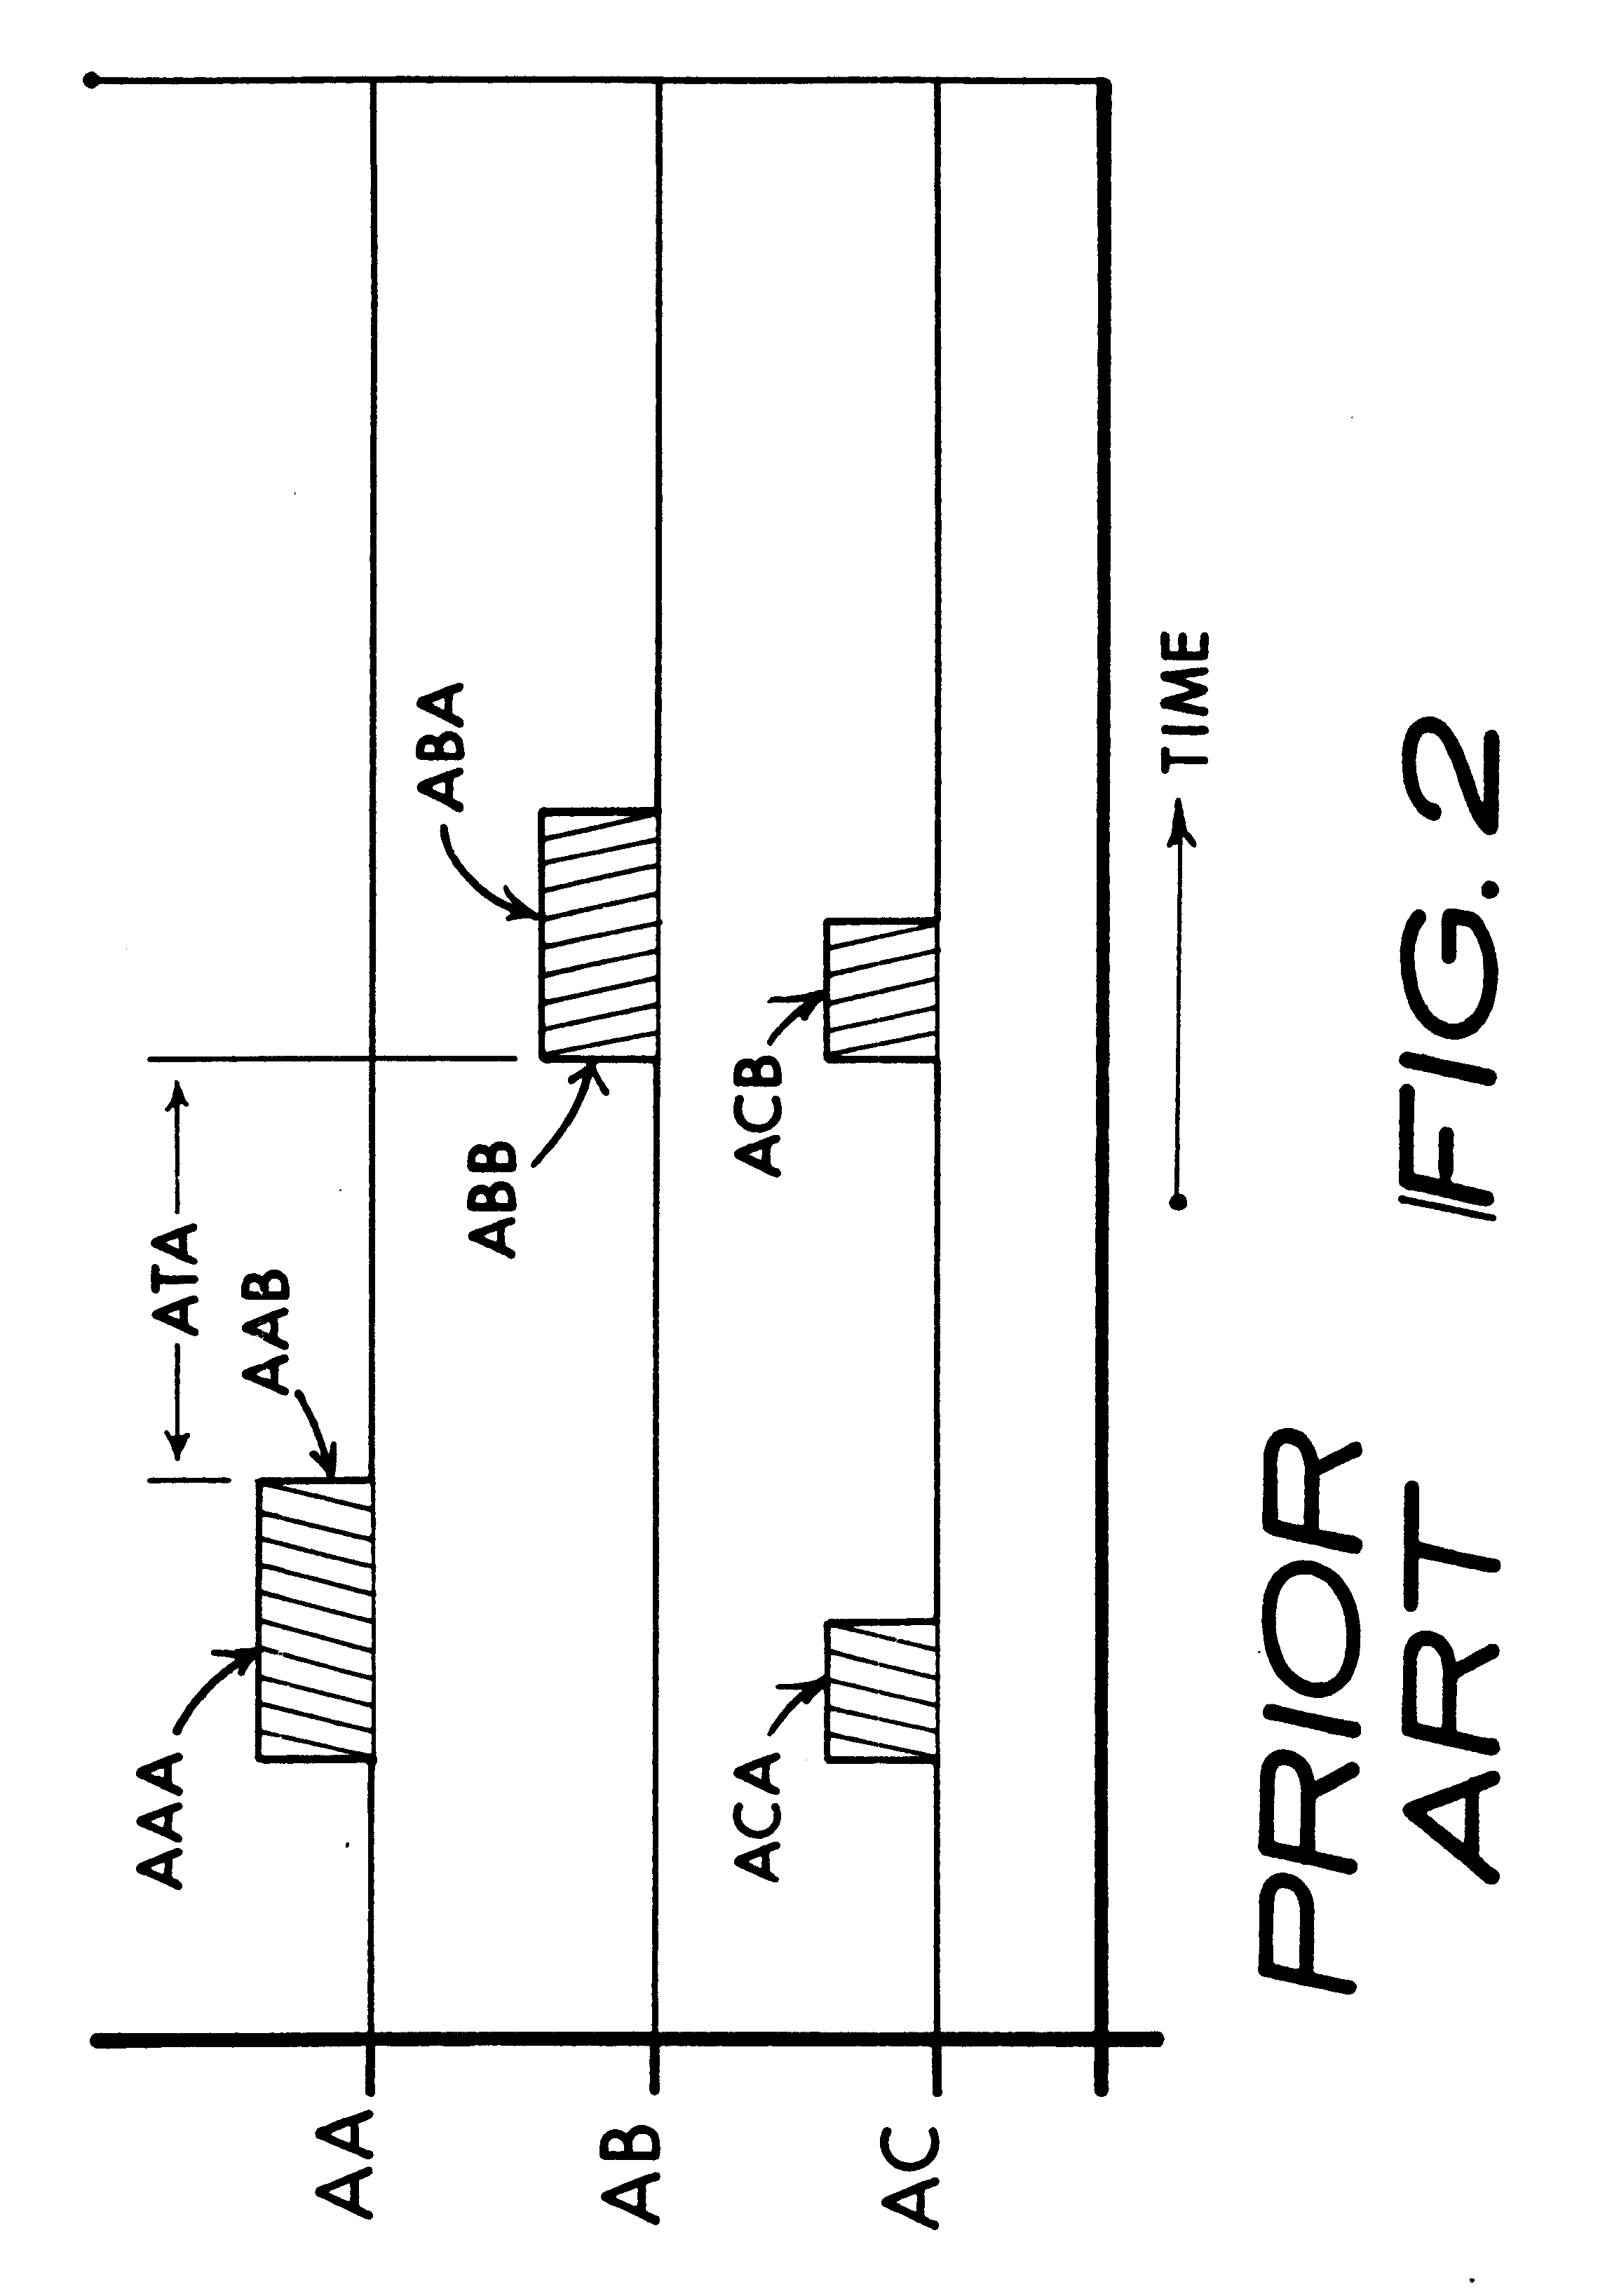 Remote controller for a multi-device television receiving system providing channel number auto-completion, presettable audio hush level and base channel auto-reaffirm